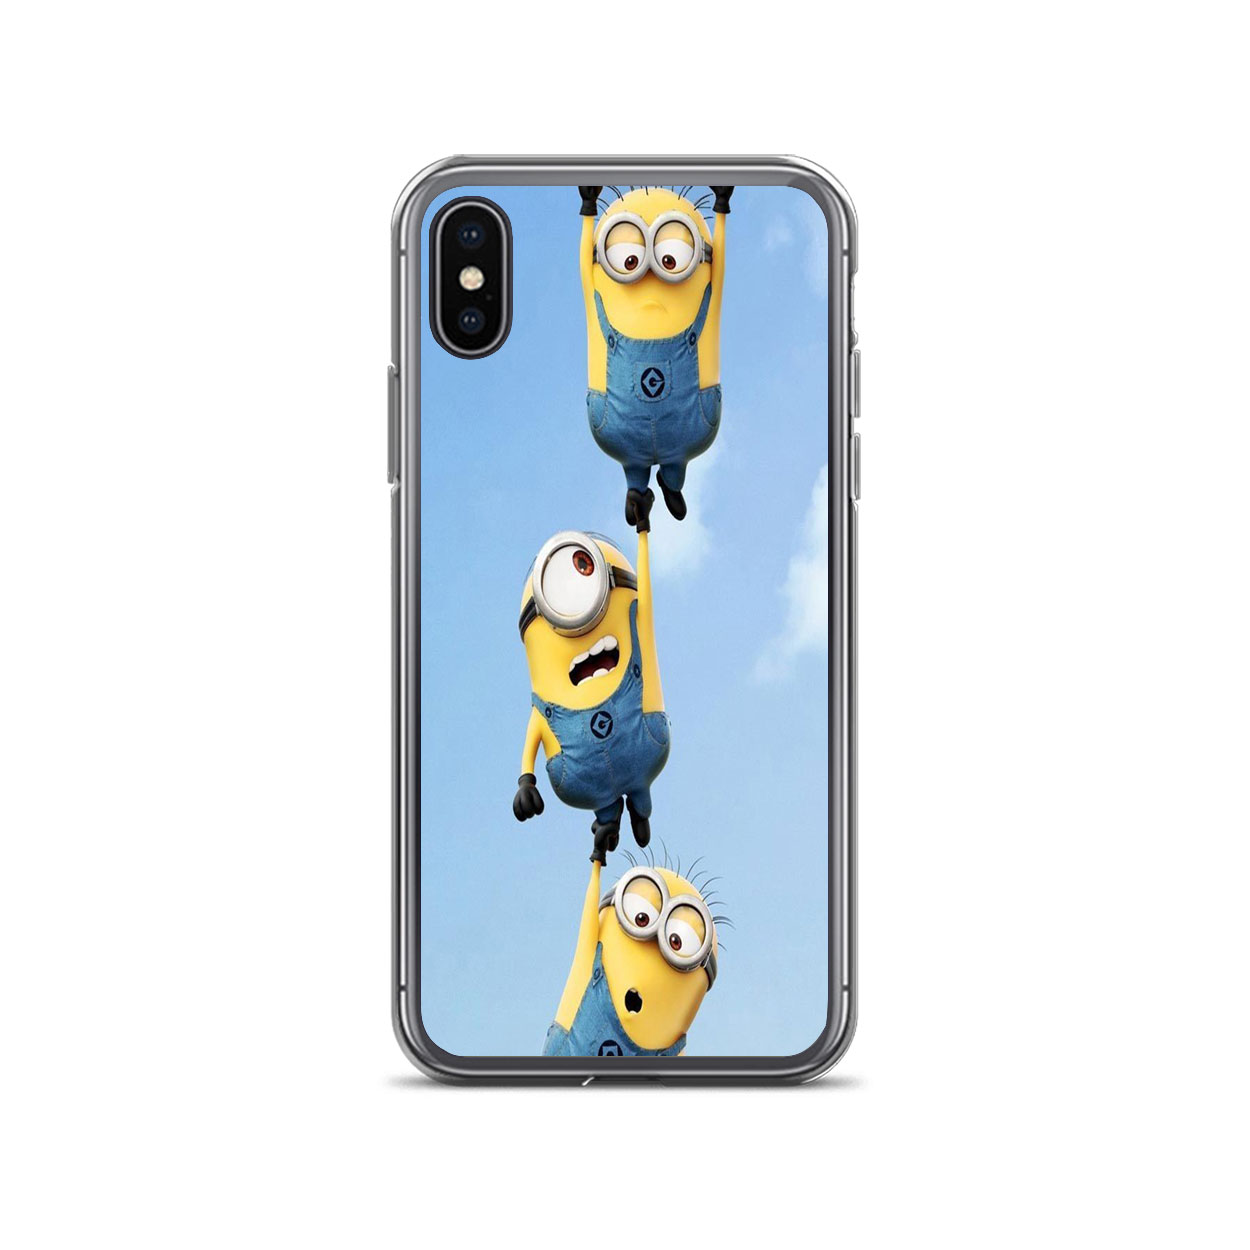 wedstrijd Aanvulling Durven Funny Minions iPhone Case for 11/11 Pro/11 Pro Max,XS/XS Max,XR,X,8/8  Plus,7/7Plus,6/6S